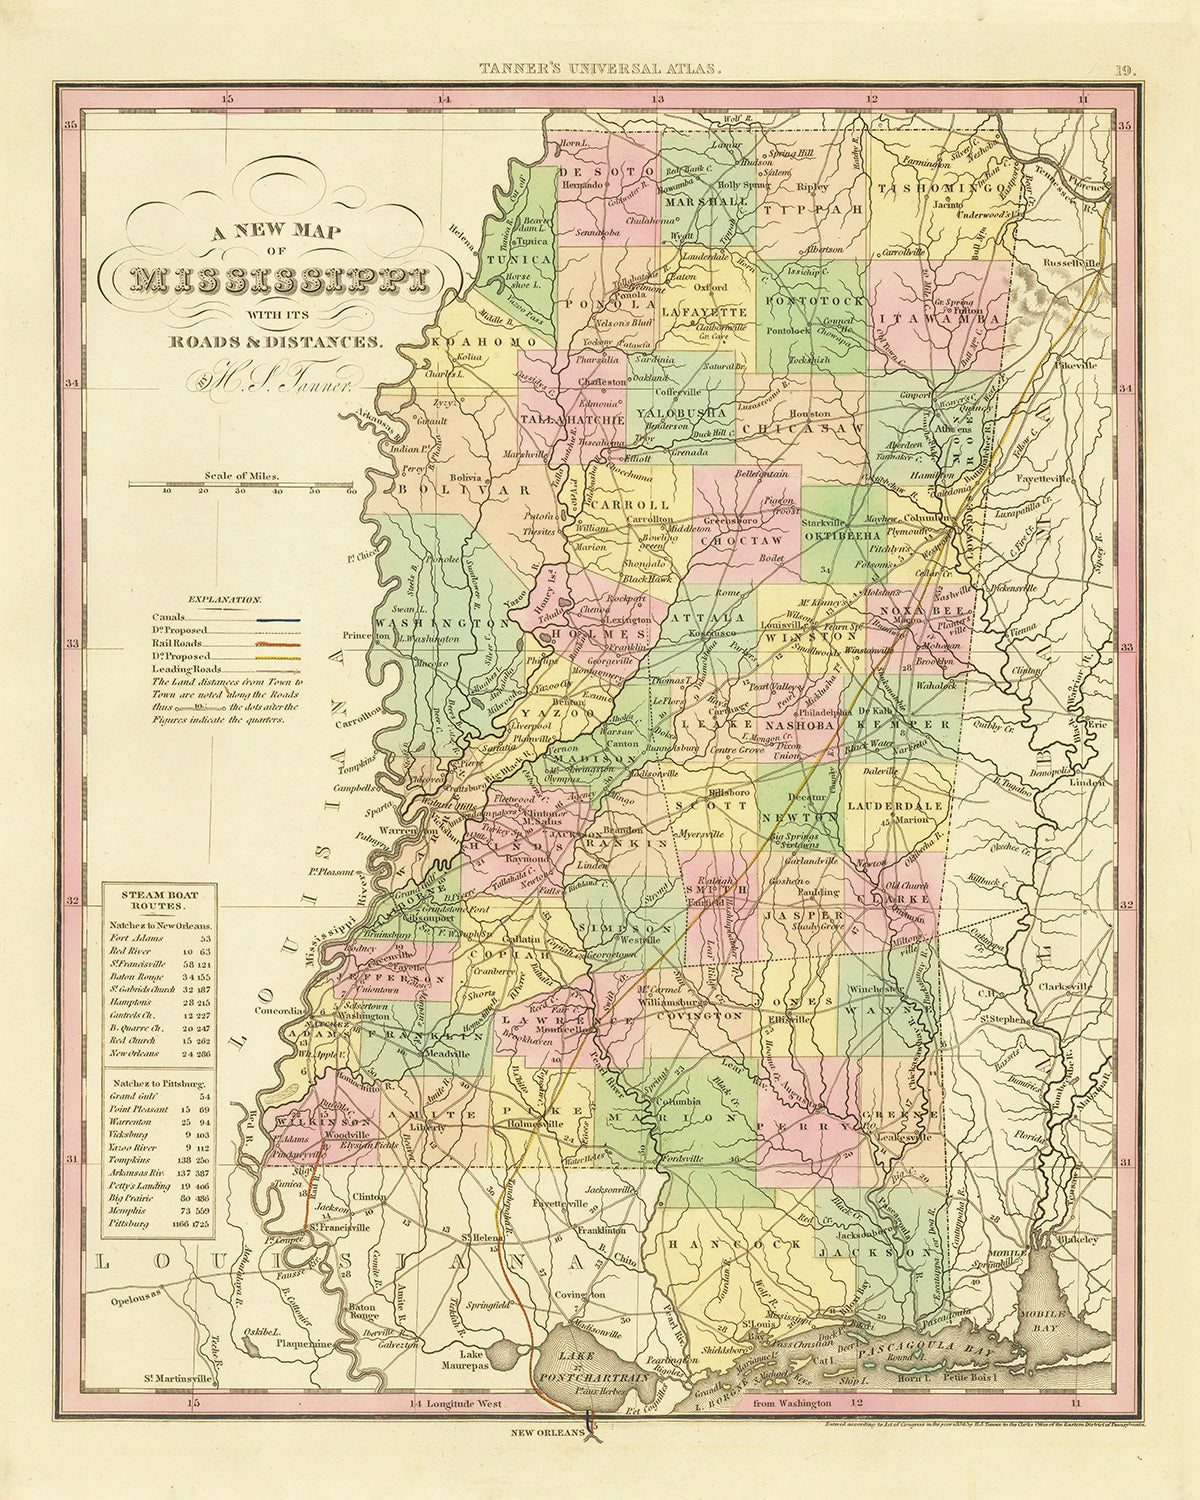 Old Map of Mississippi by H.S. Tanner, 1836: Jackson, Gulfport, Southaven, Biloxi, Tupelo, Roads, Railway, Canals